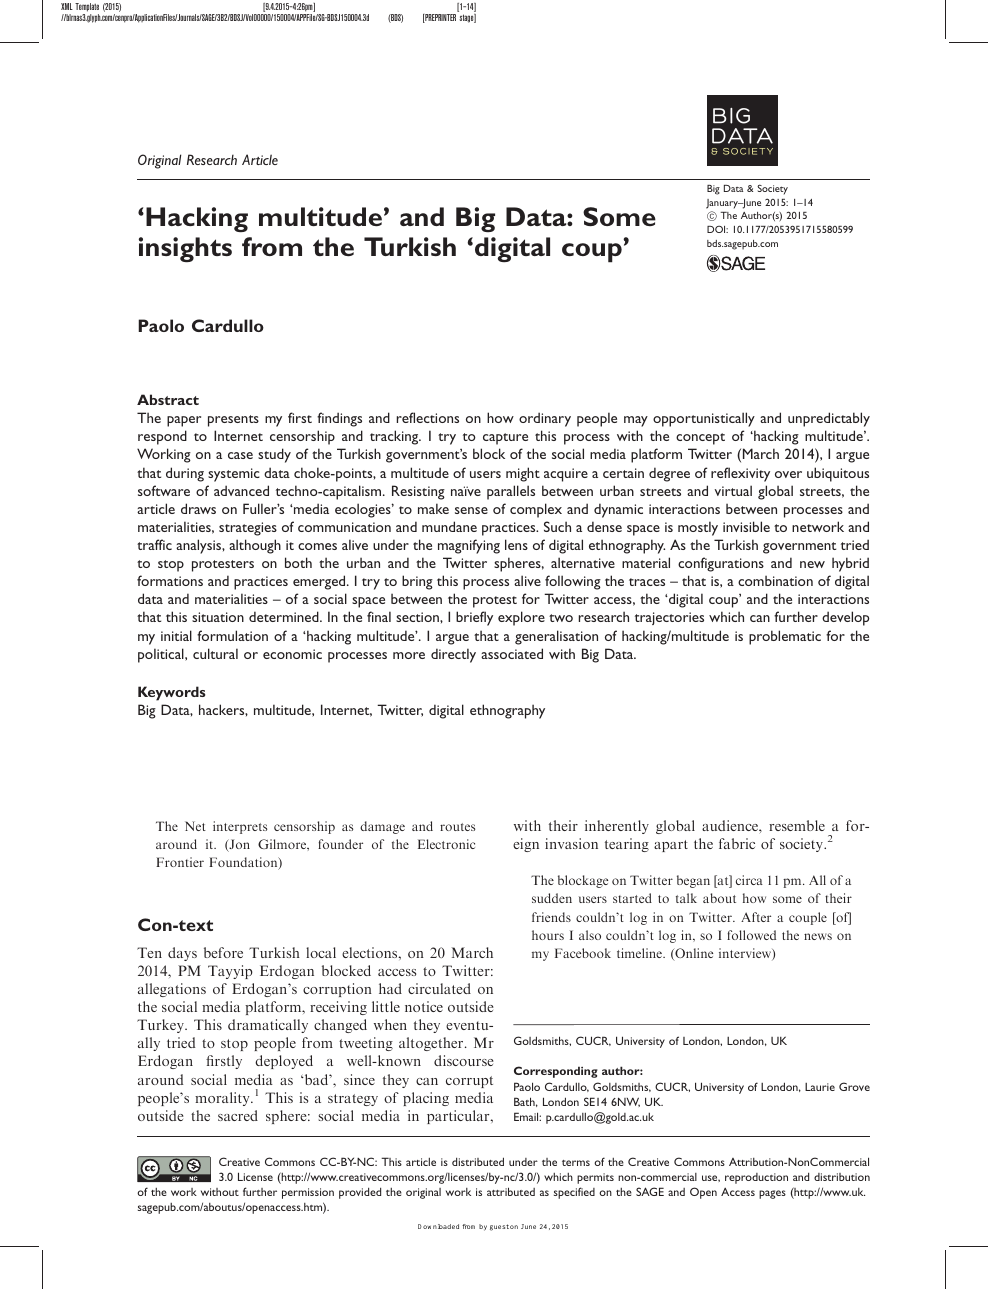 Hacking multitude' and Big Data: Some insights from the Turkish 'digital  coup' – topic of research paper in Media and communications. Download  scholarly article PDF and read for free on CyberLeninka open